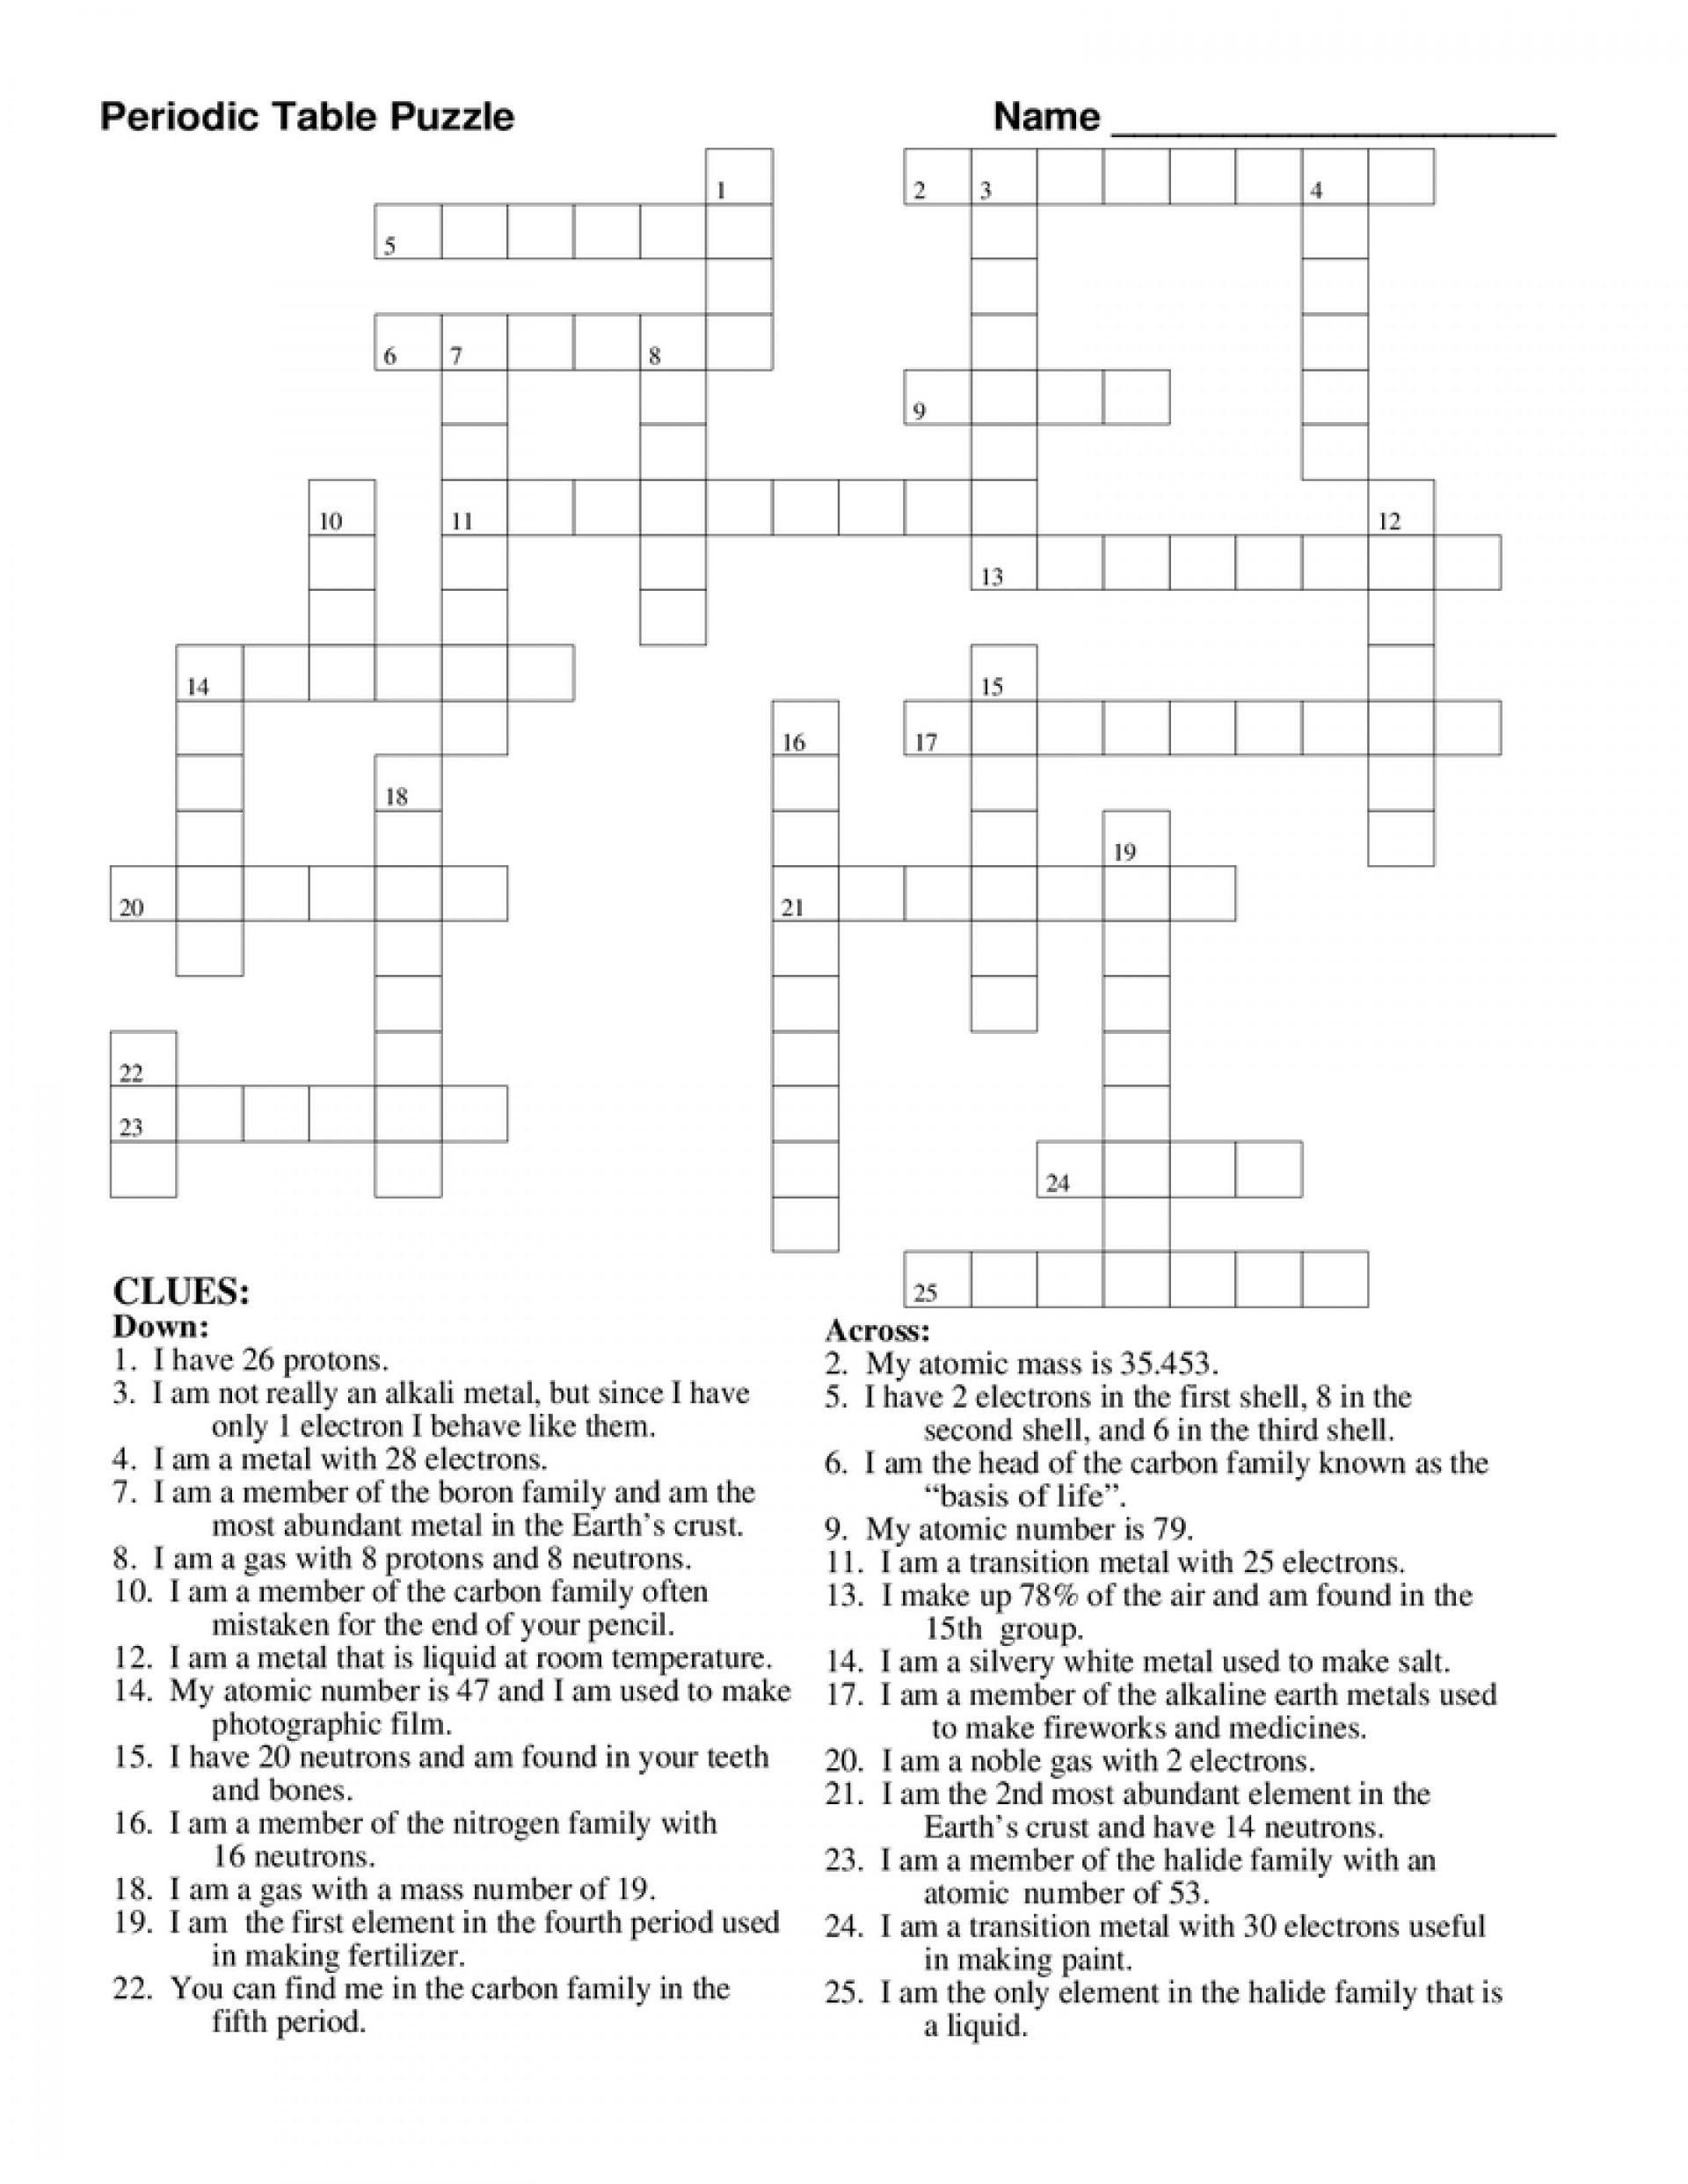 Periodic Table Crossword Pdf Best Of Periodic Table Puzzle Worksheet - Printable Crossword Puzzles With Answers Pdf